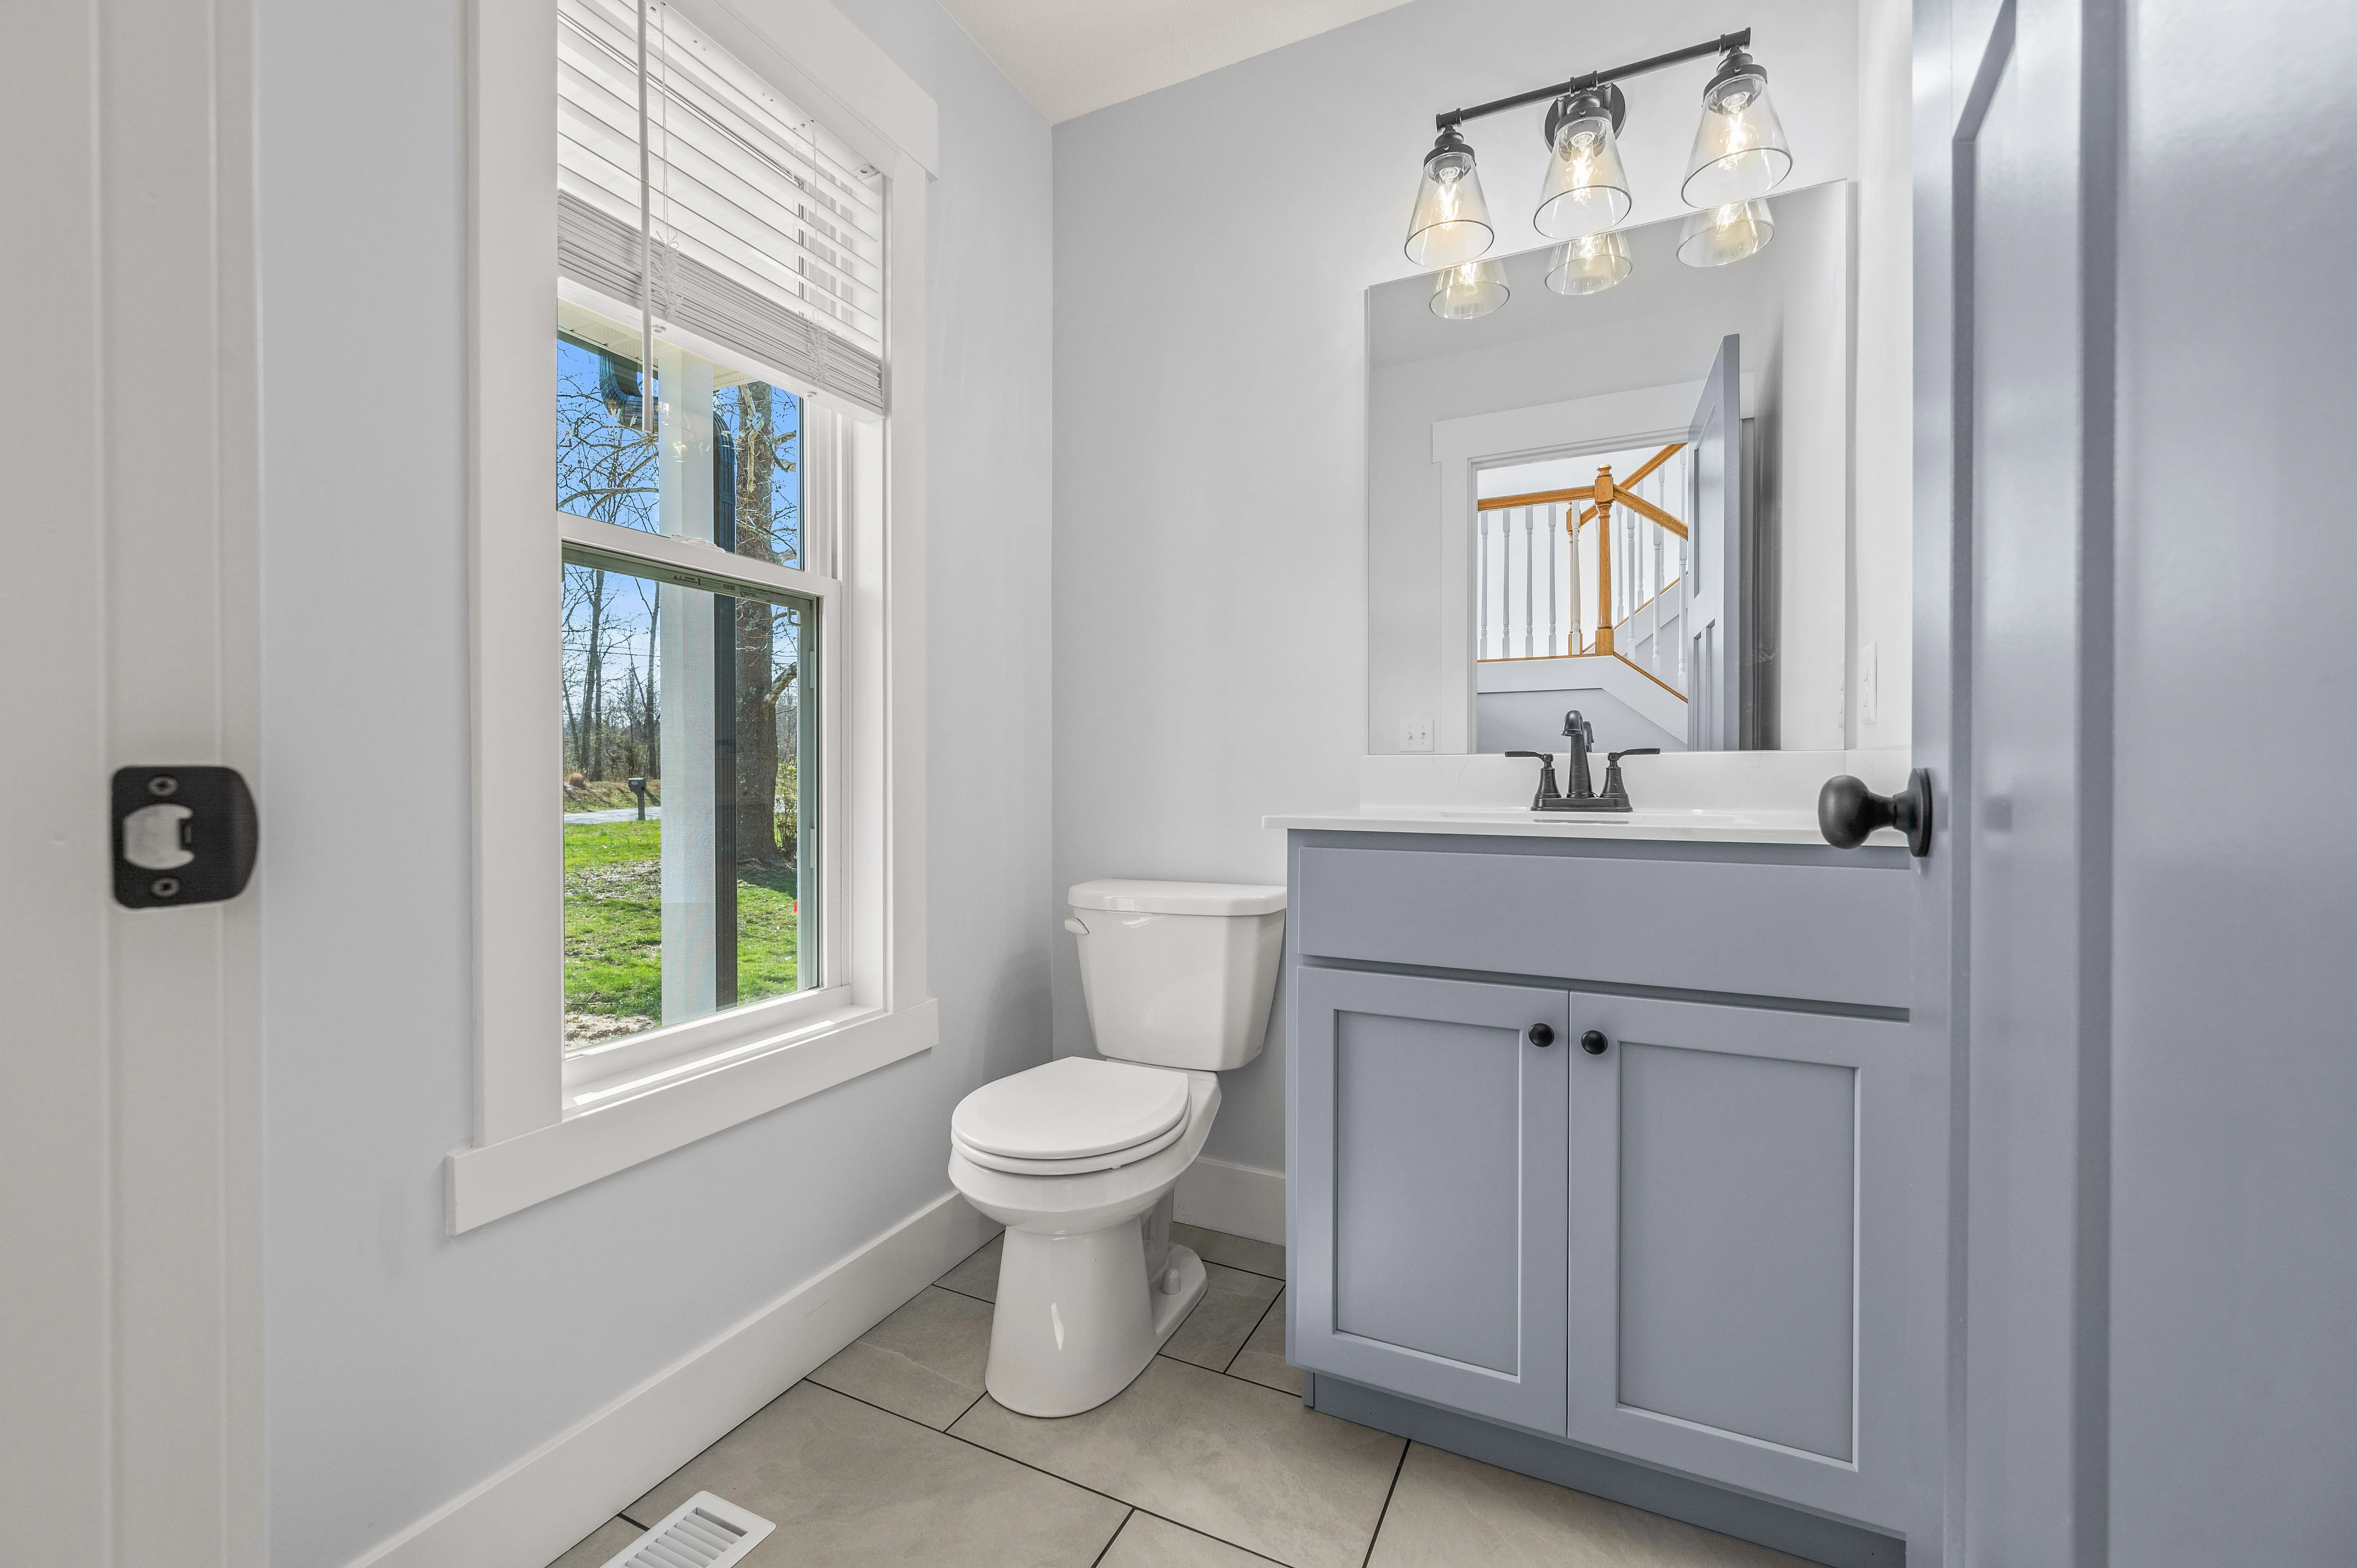 Modern bathroom interior with a window overlooking the yard, featuring a toilet and a blue vanity with sink and mirror.